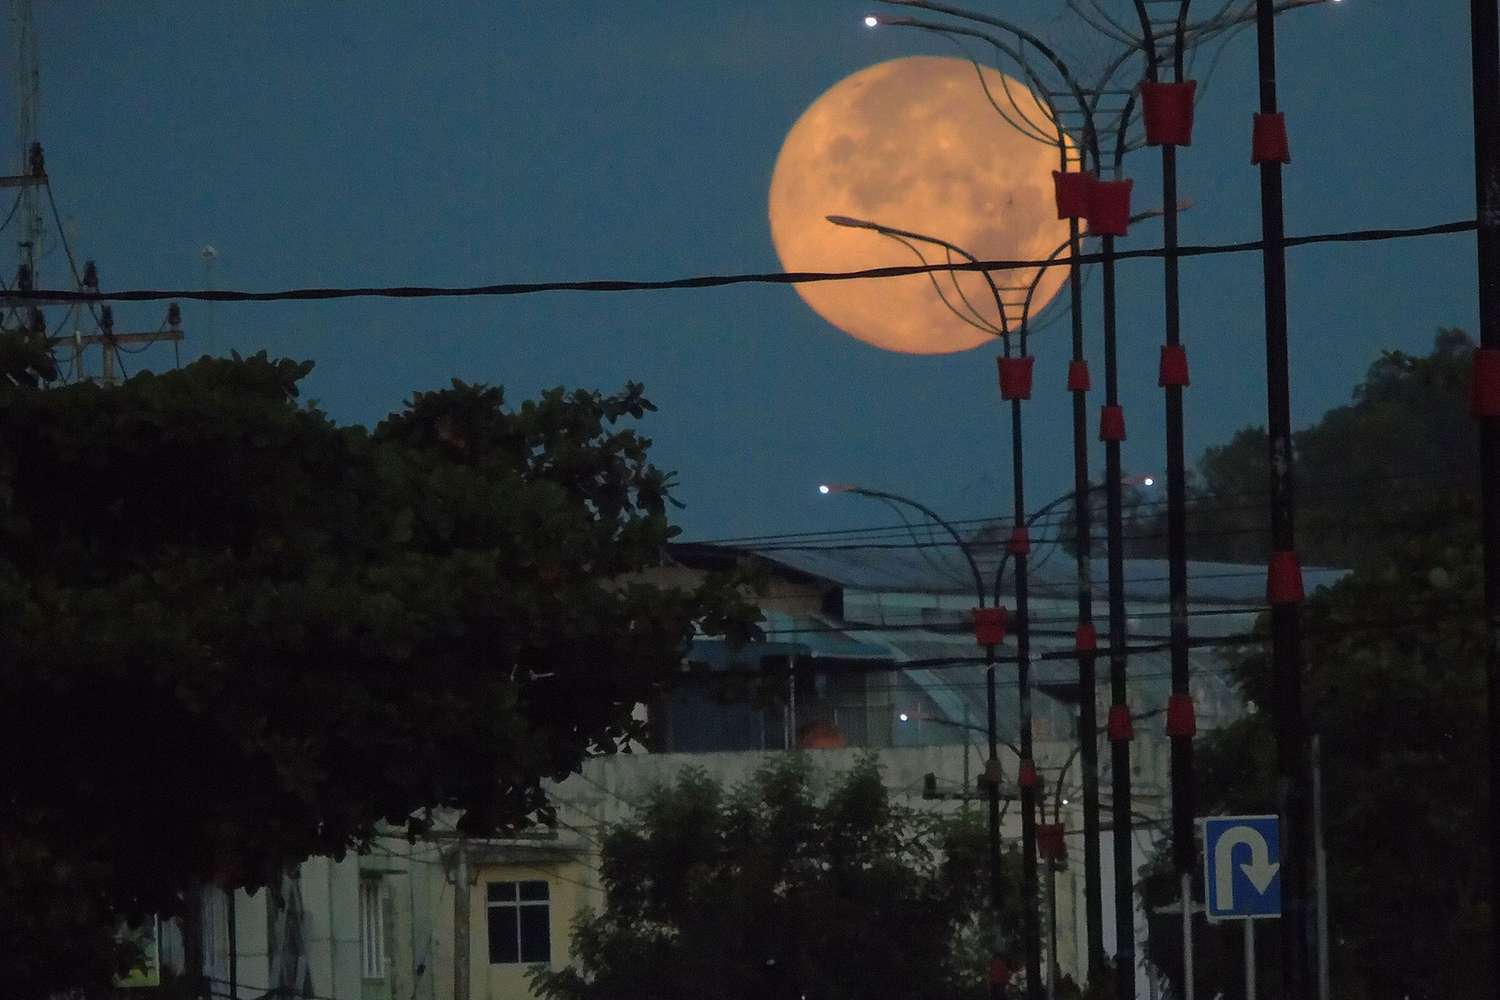 2021 Pink Supermoon: Details About When It Will Appear | PEOPLE.com